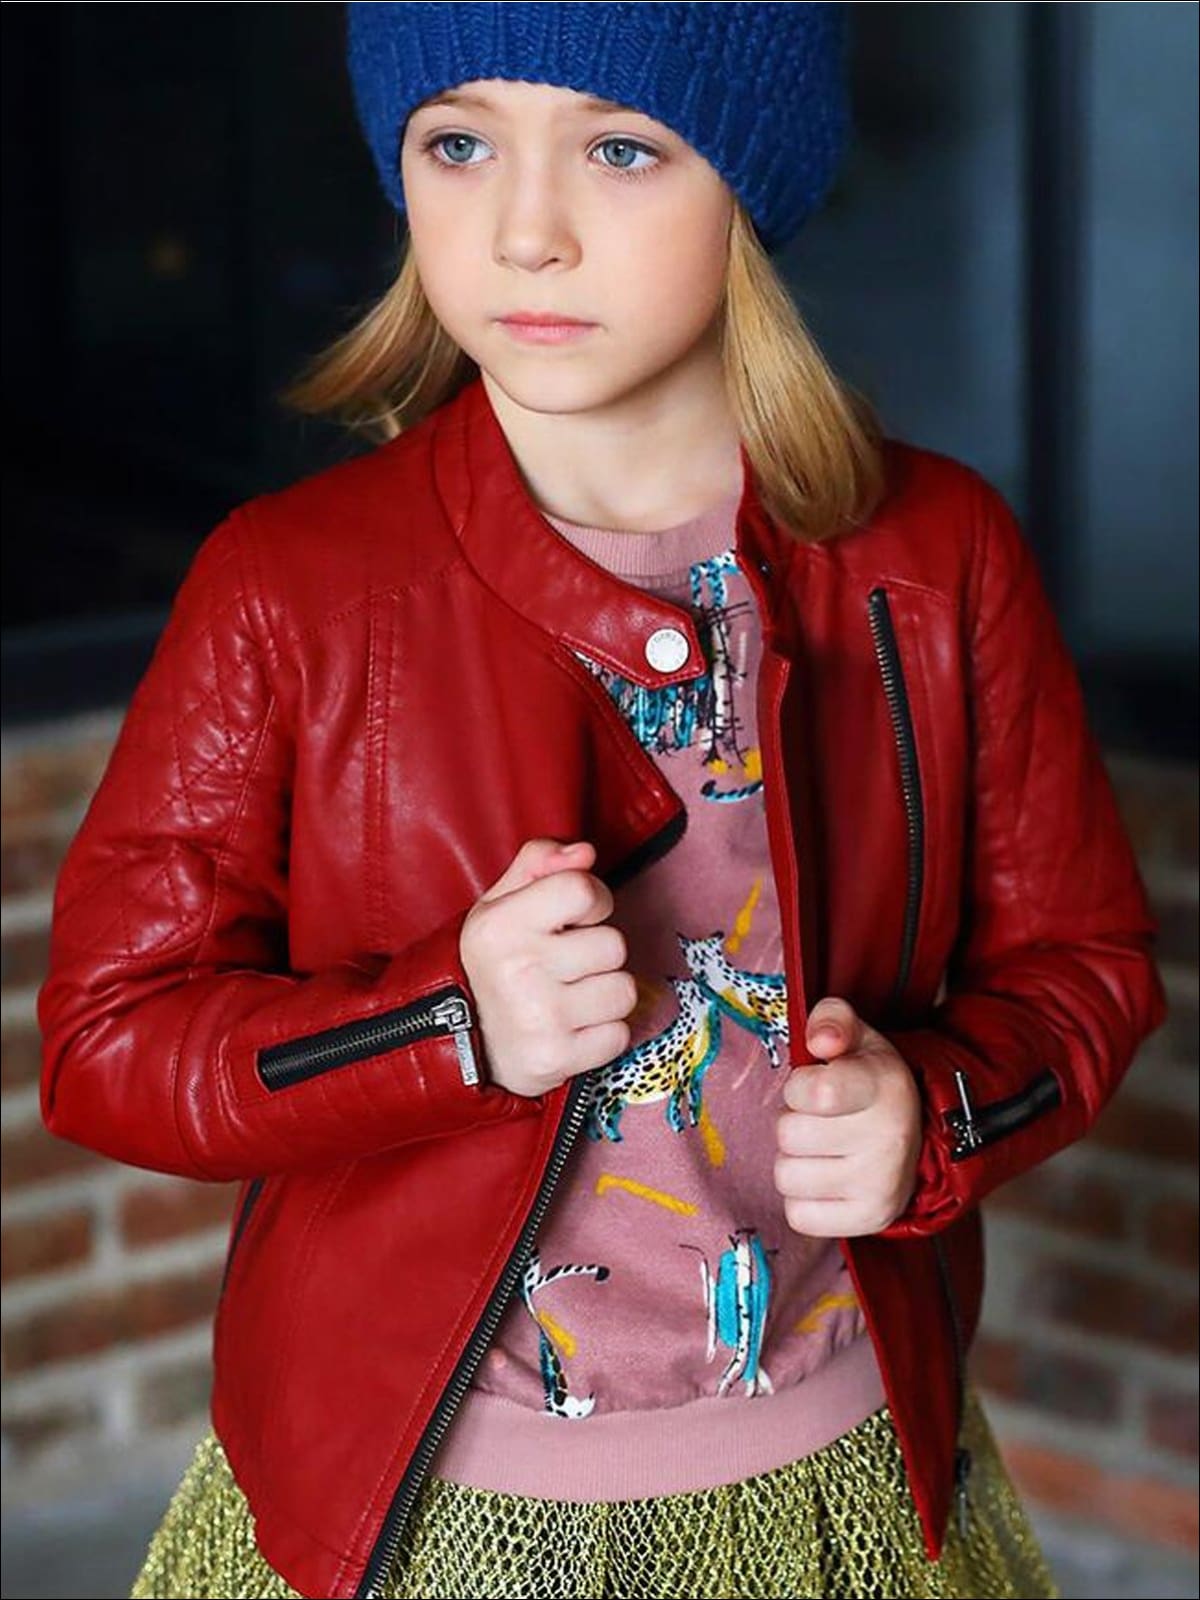 Girls Quilted Sleeve Synthetic Leather Moto Jacket - Red / 3T - Girls Jacket